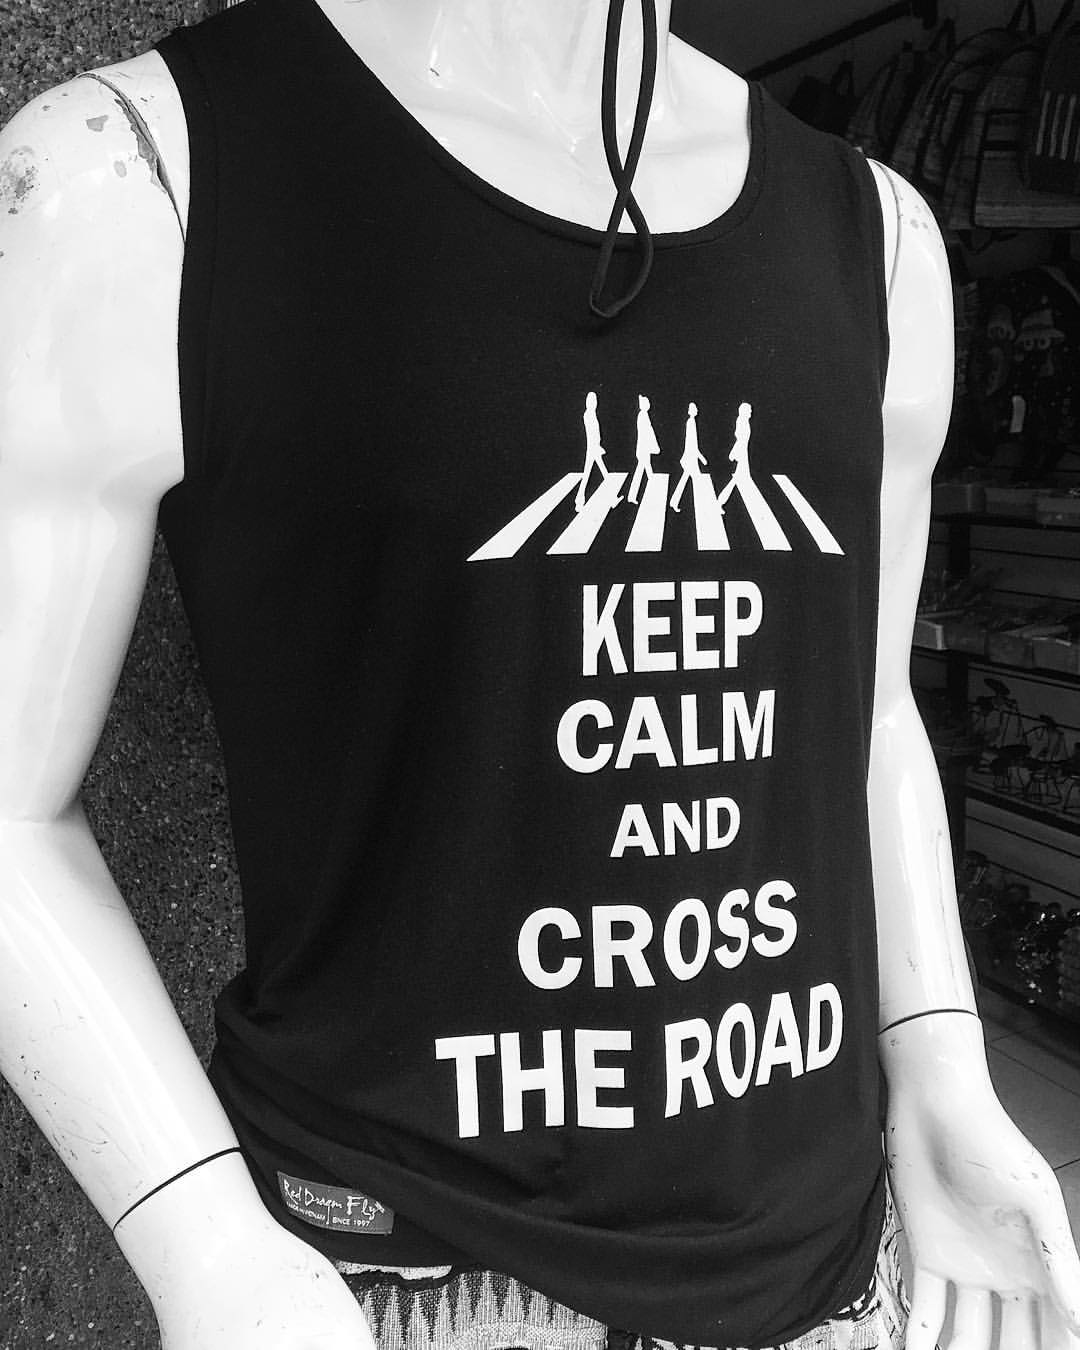 Keep calm and cross the road